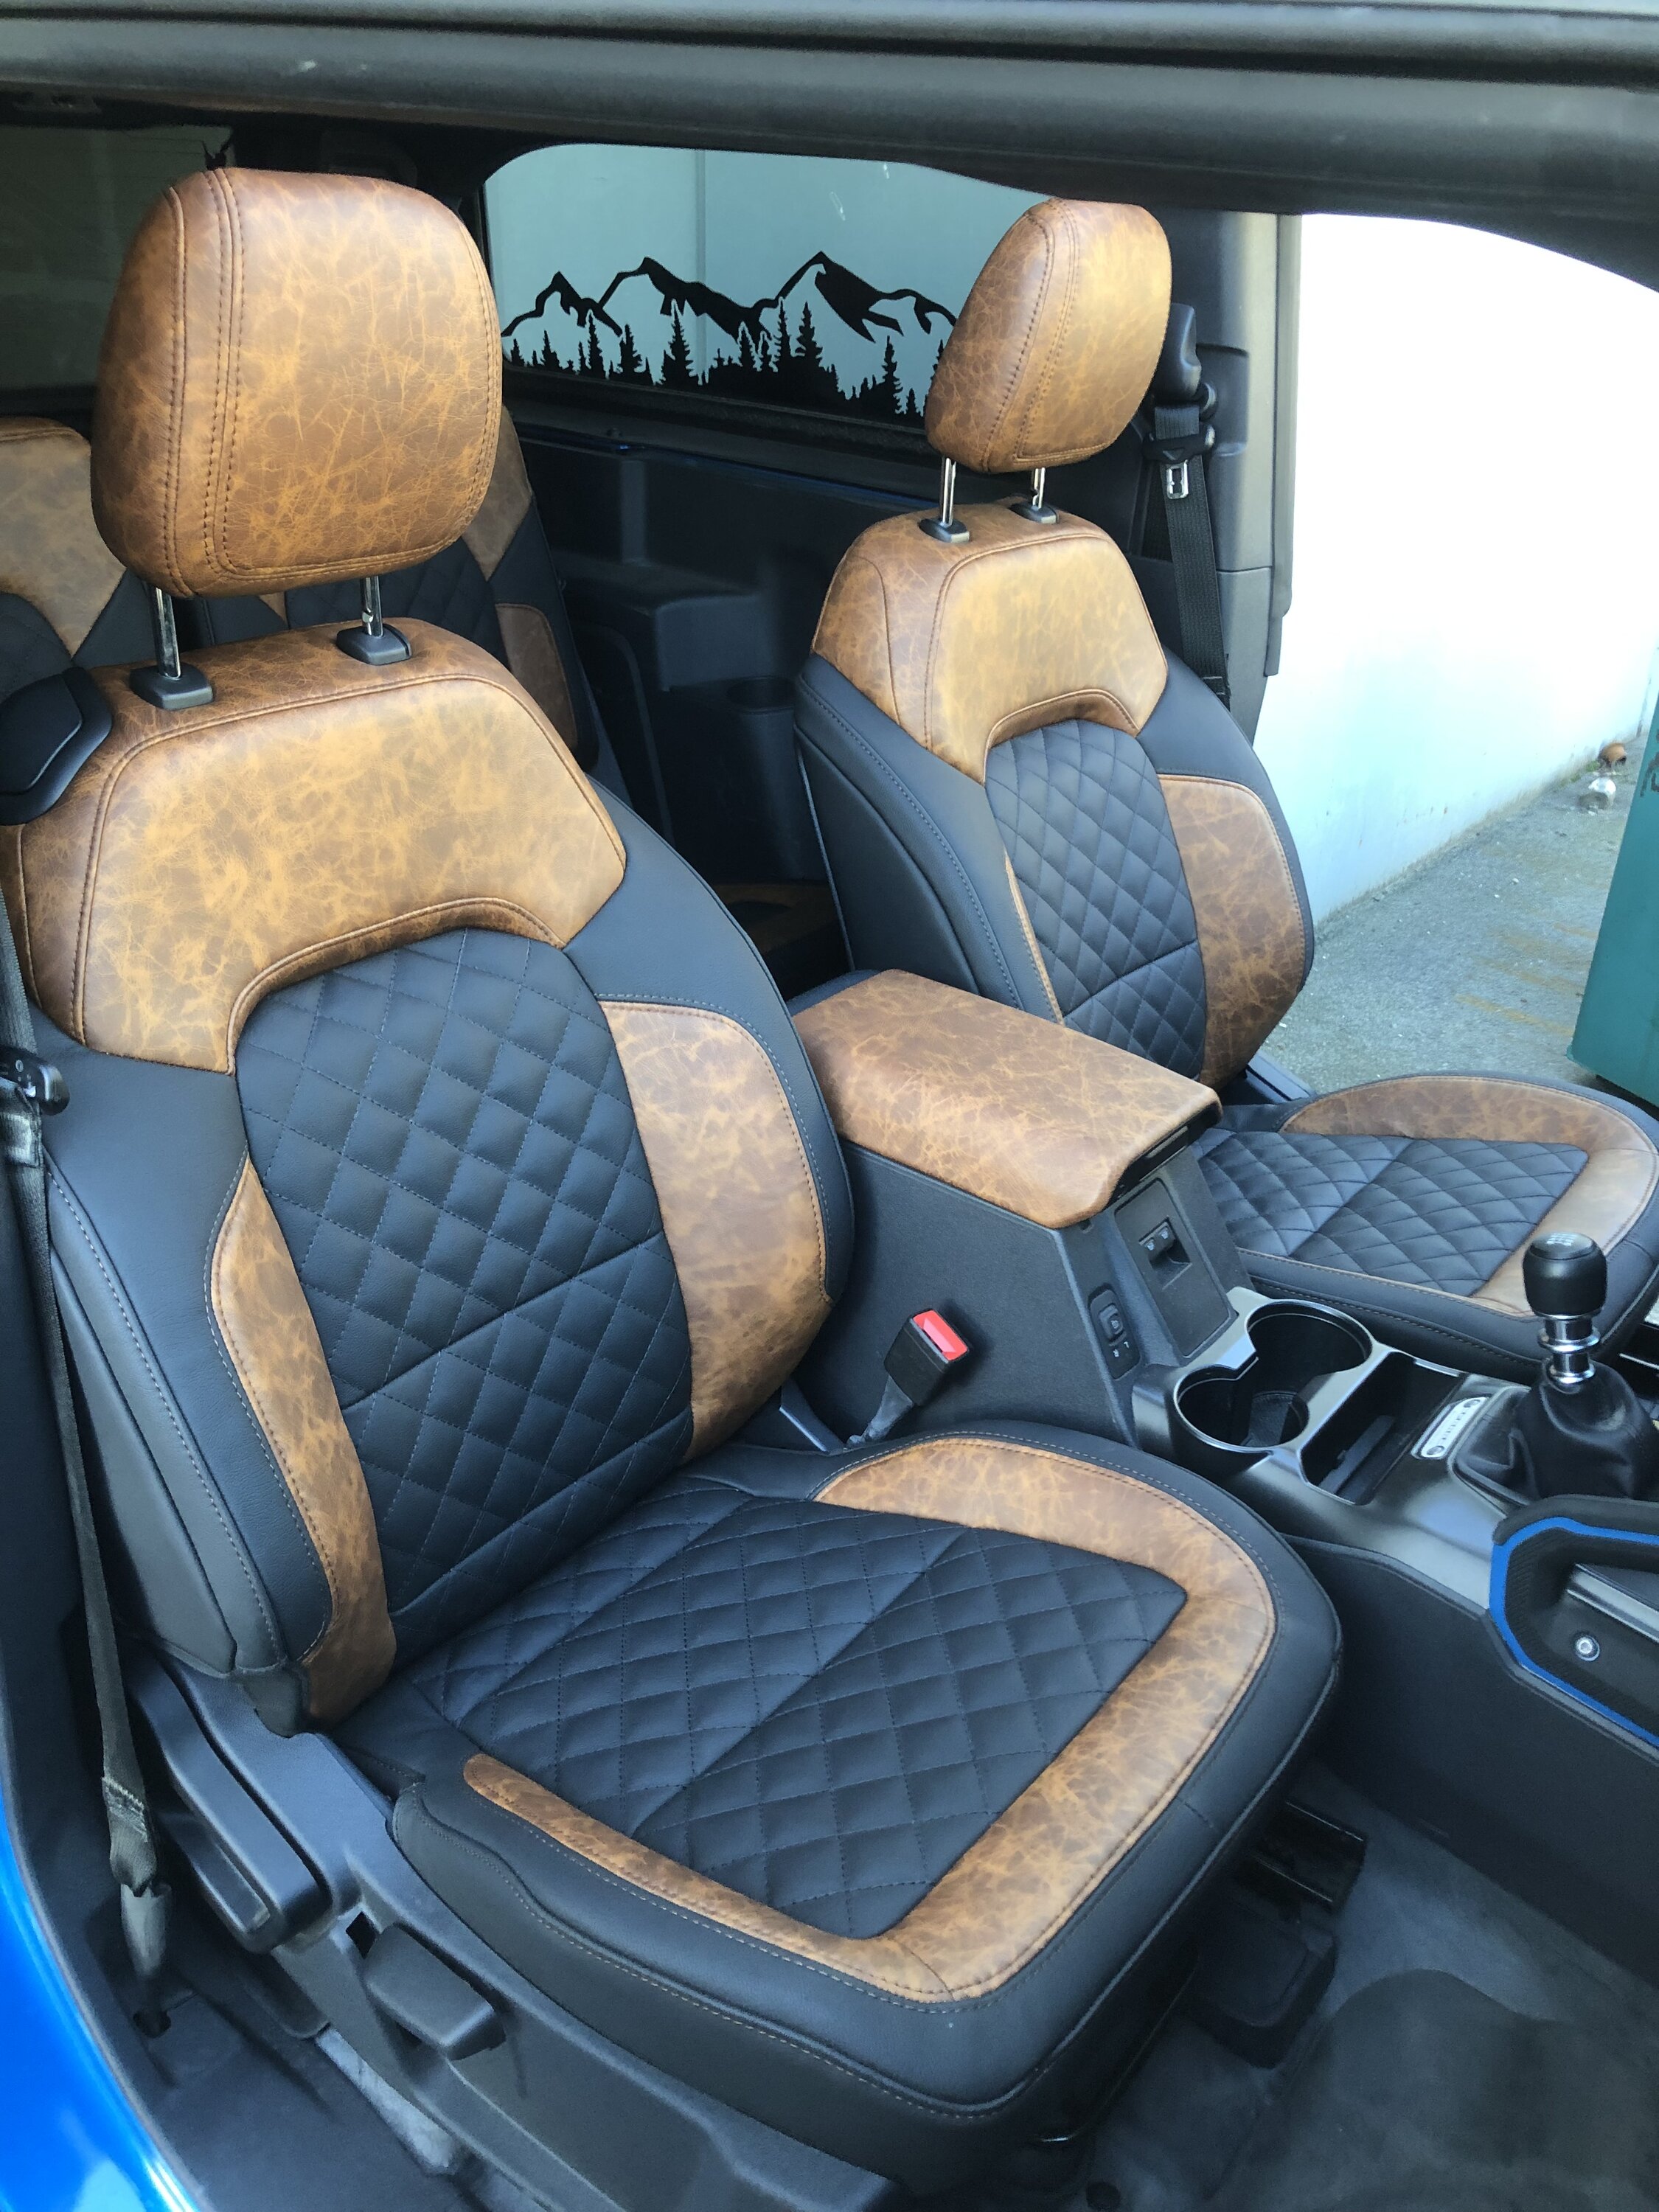 Ford Bronco Custom Interior & Seats Inspired by Pre-Production Bronco image4 (17)